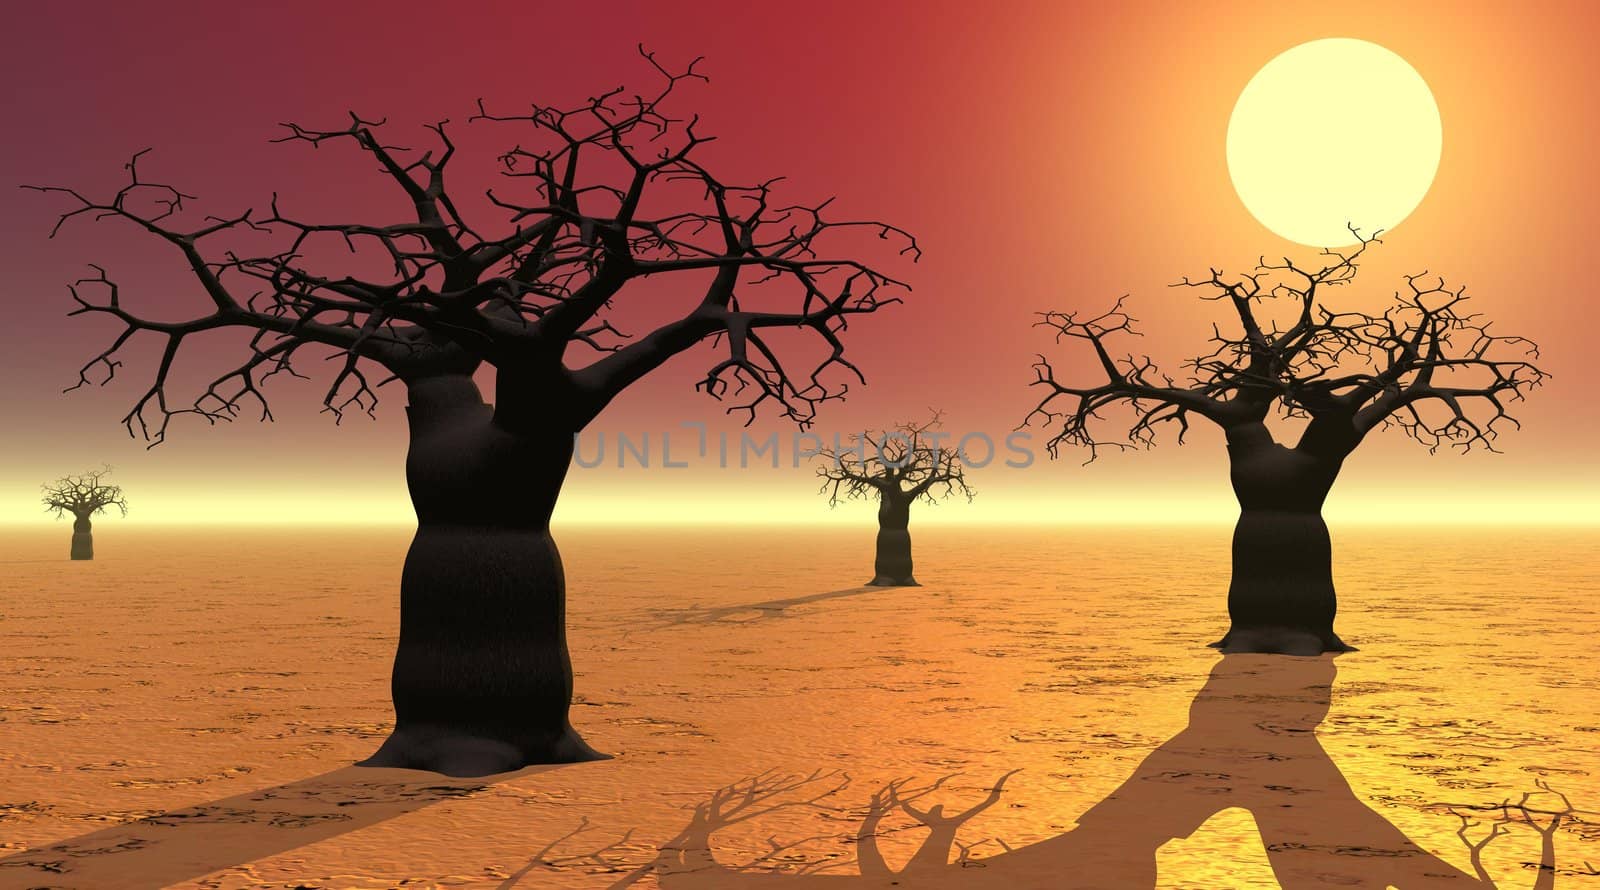 Baobabs with shadows in the desert by sunset